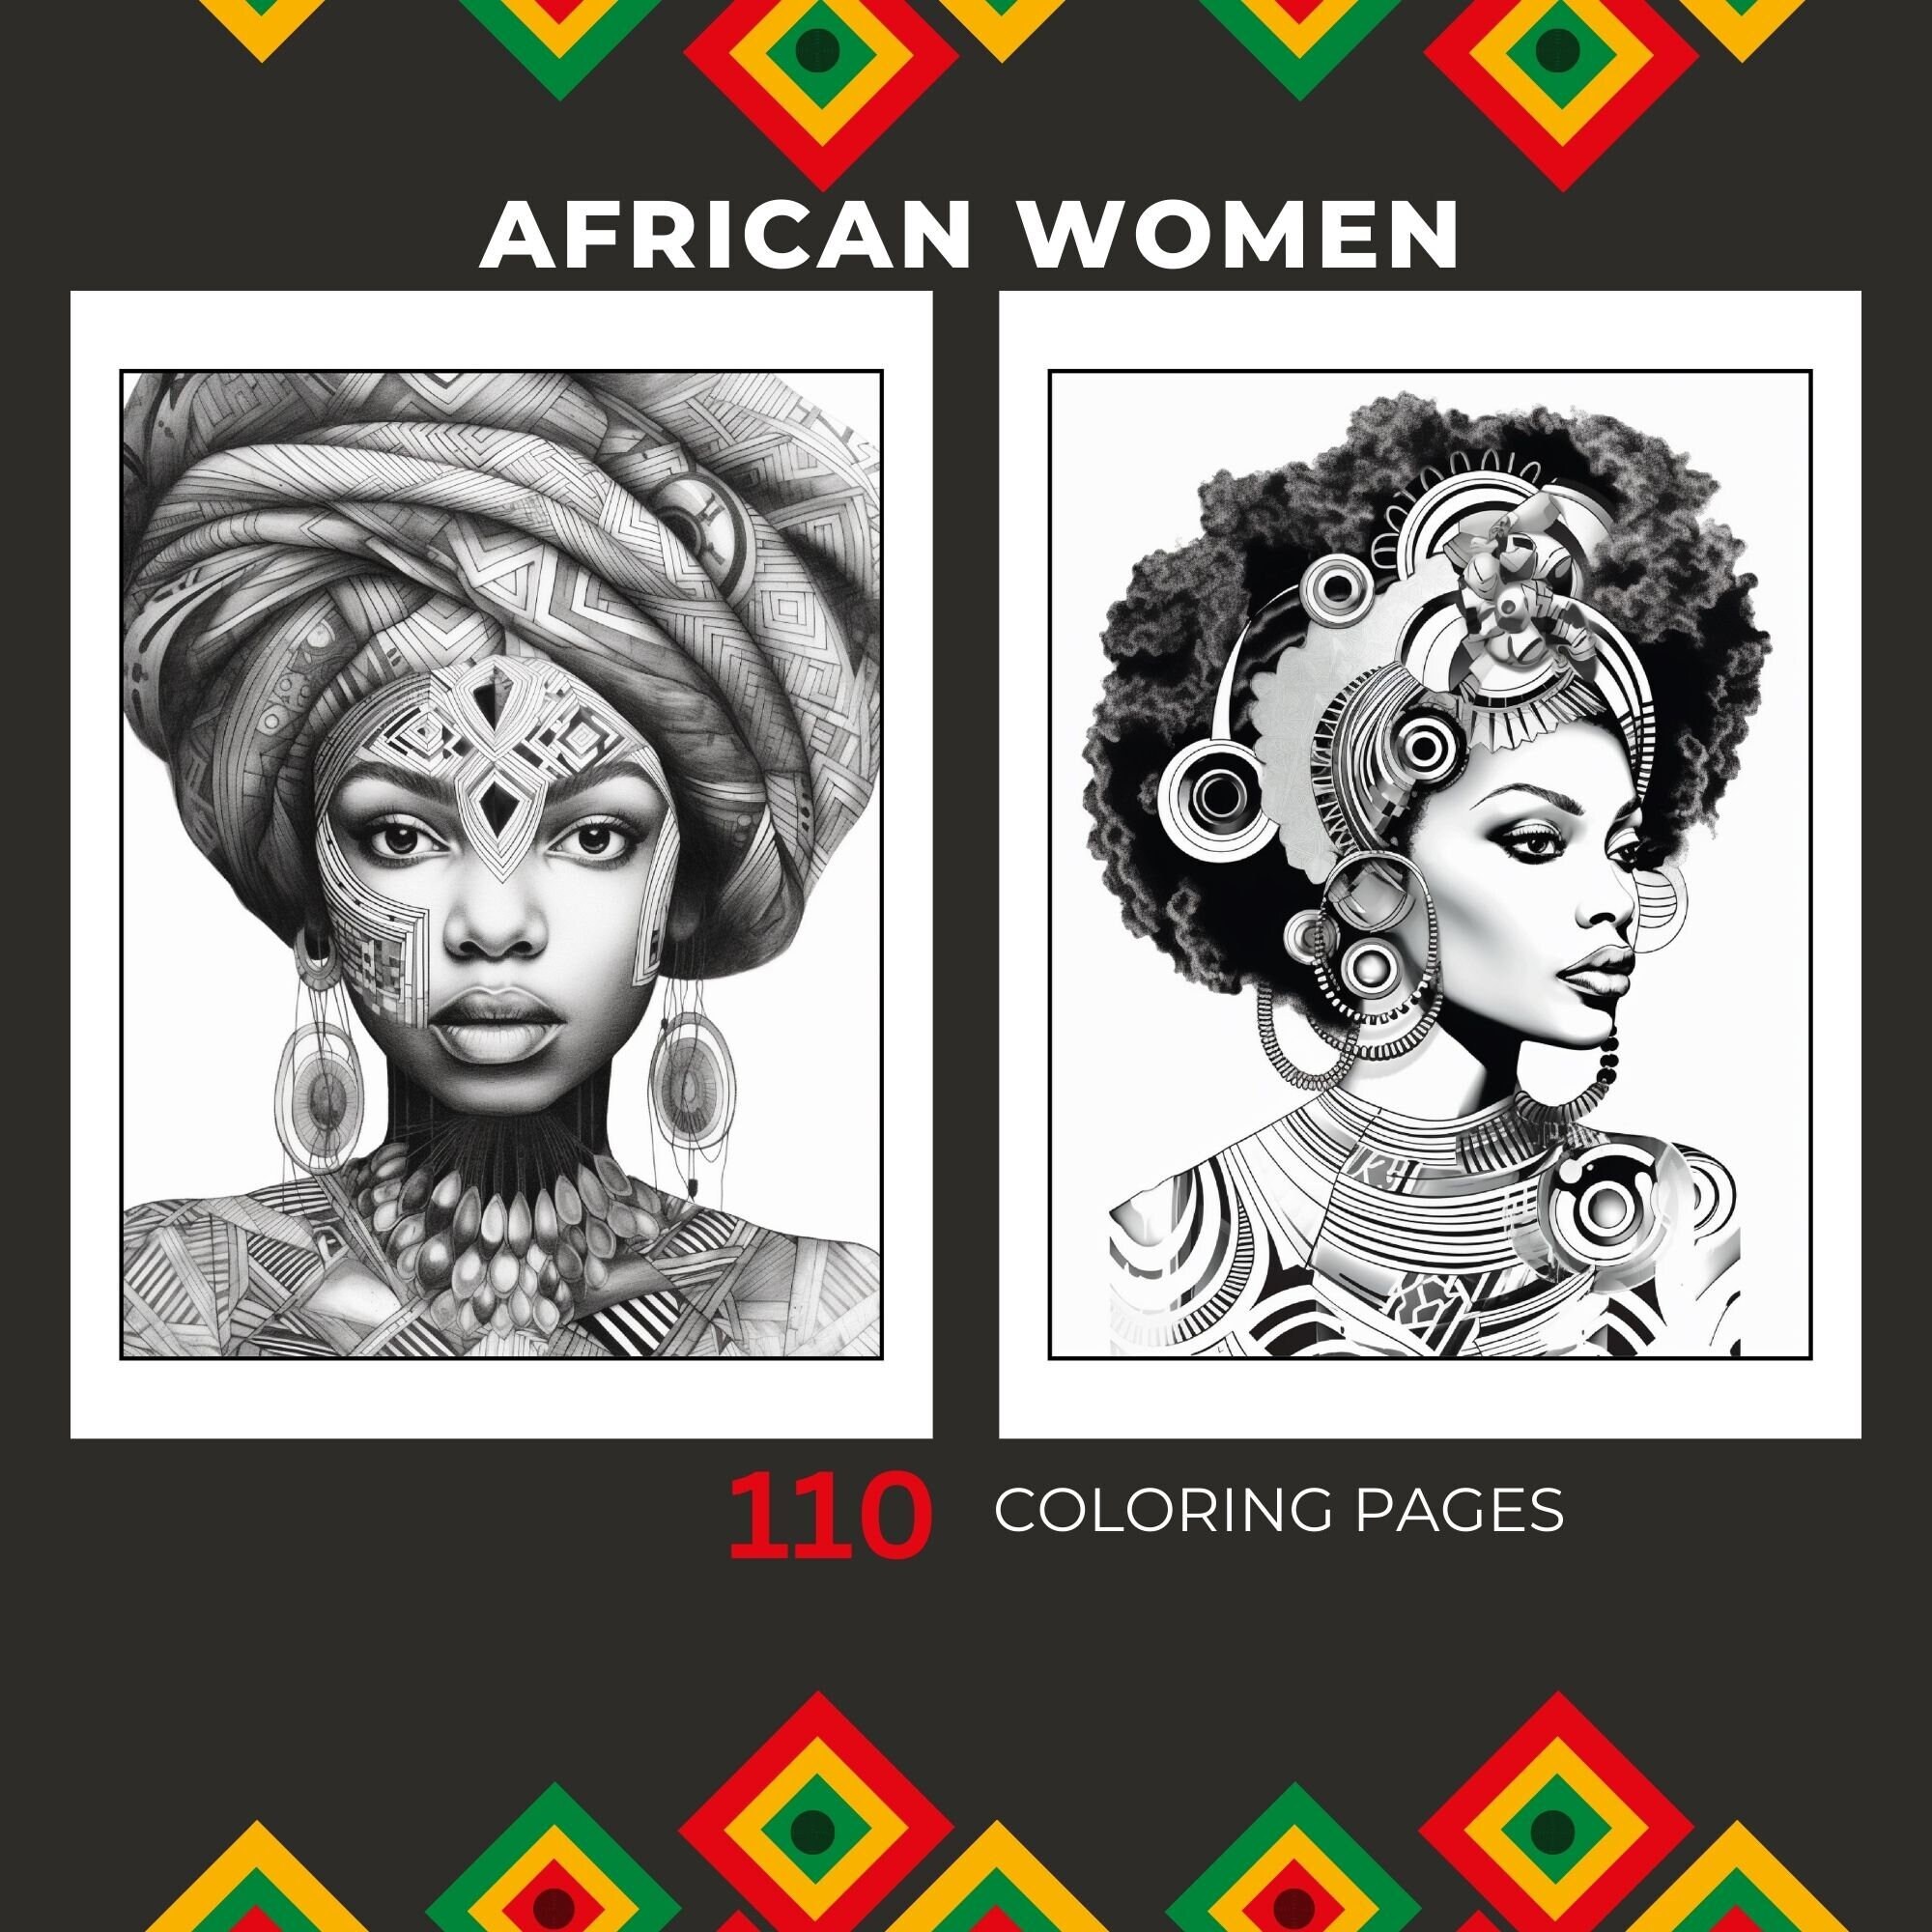 African woman coloring pages printable coloring book adult coloring fantasy coloring pages for adults digital product